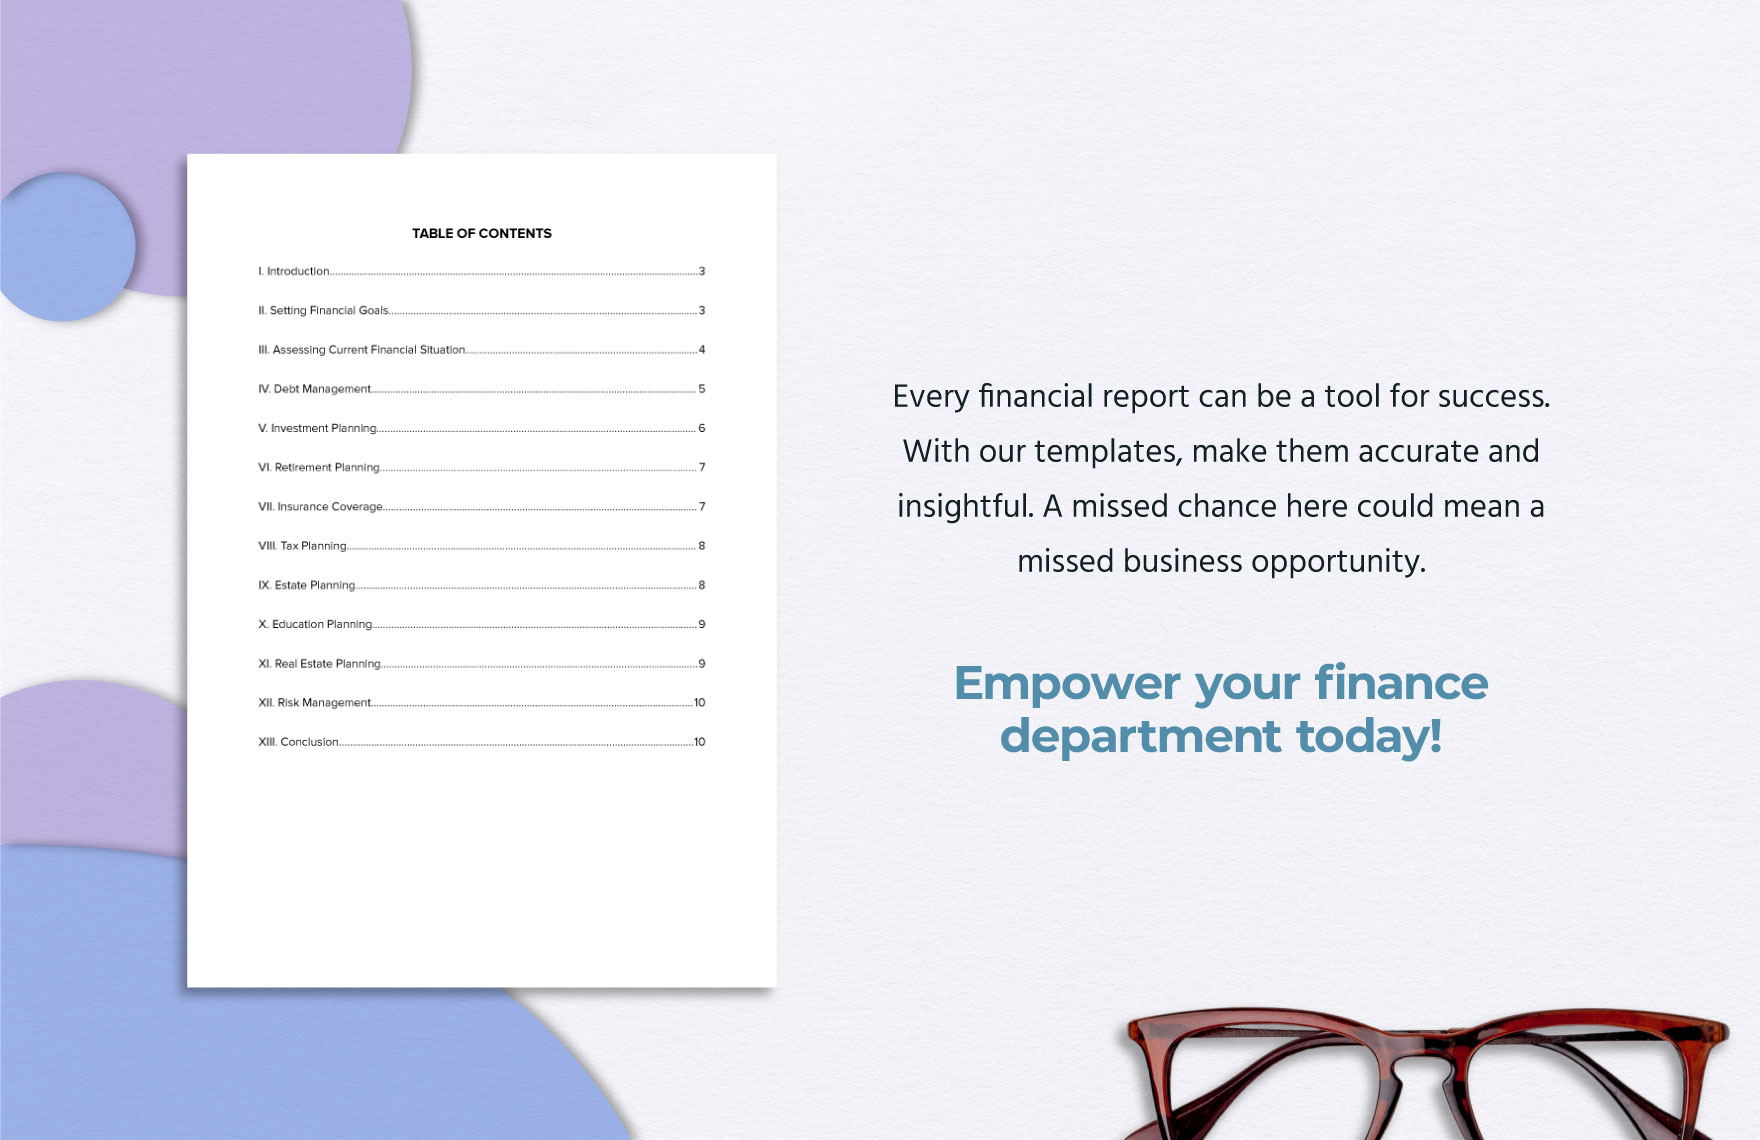 Extensive Financial Planning Guide Template